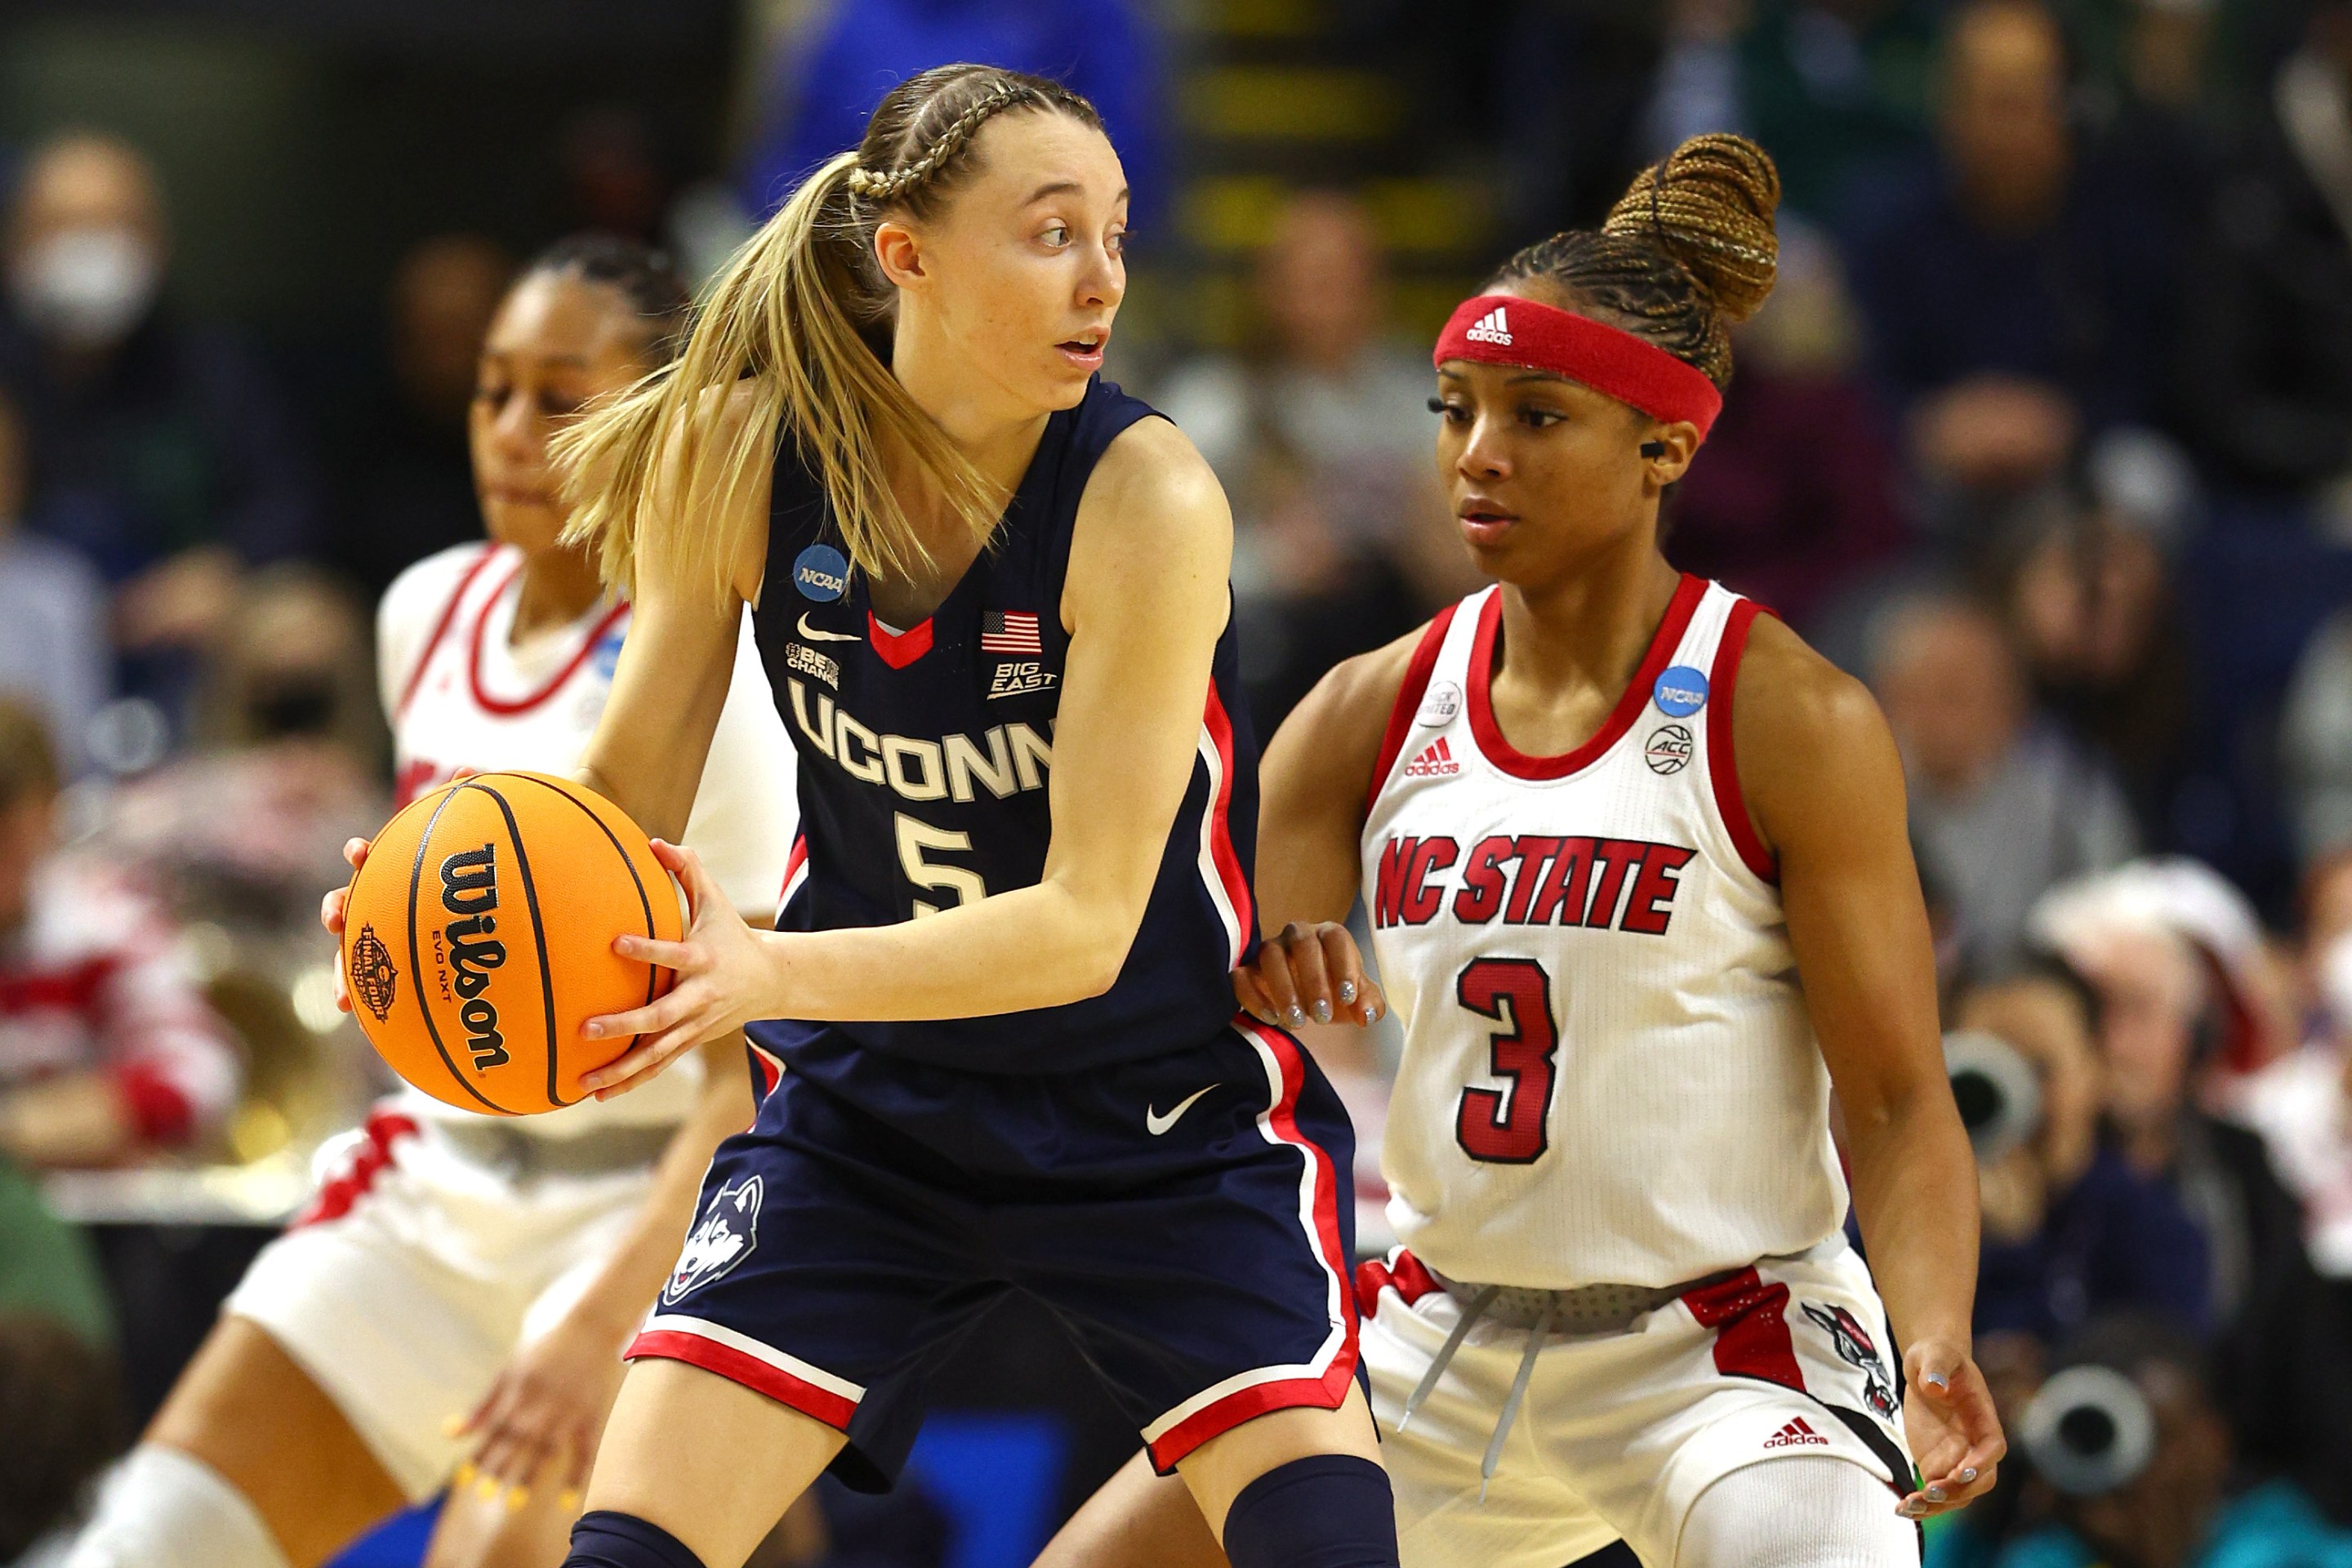 Kai Crutchfield #3 of the NC State Wolfpack defends against Paige Bueckers #5 of the UConn Huskies during the first half in the NCAA Women's Basketball Tournament Elite 8 Round at Total Mortgage Arena on March 28, 2022 in Bridgeport, Connecticut.